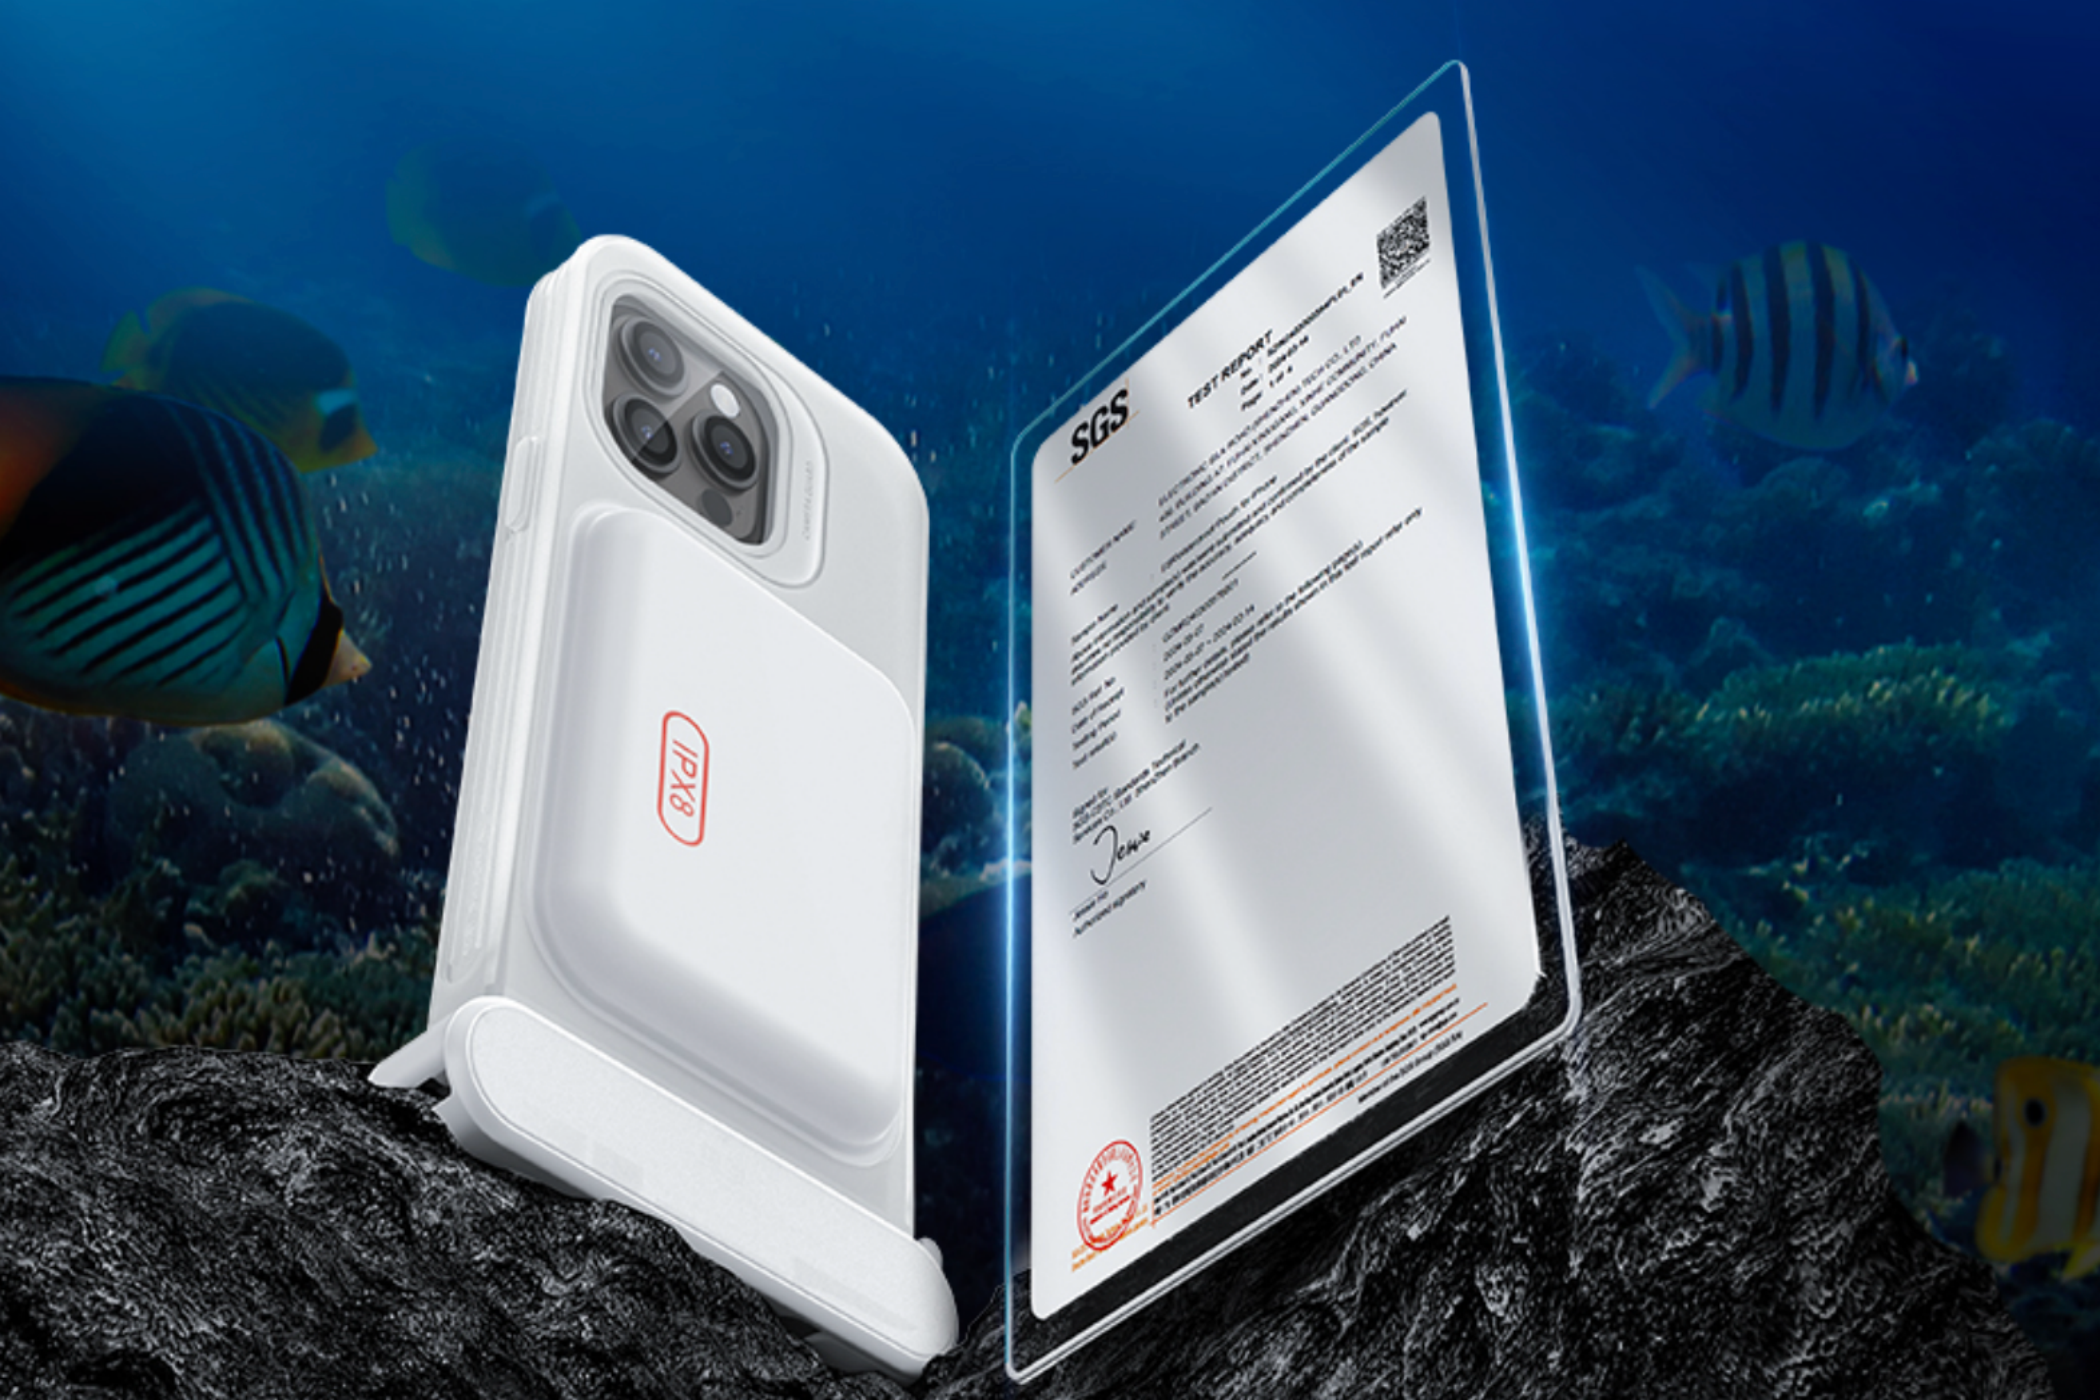 An ESR phone case safely underwater with iPhone and certification.